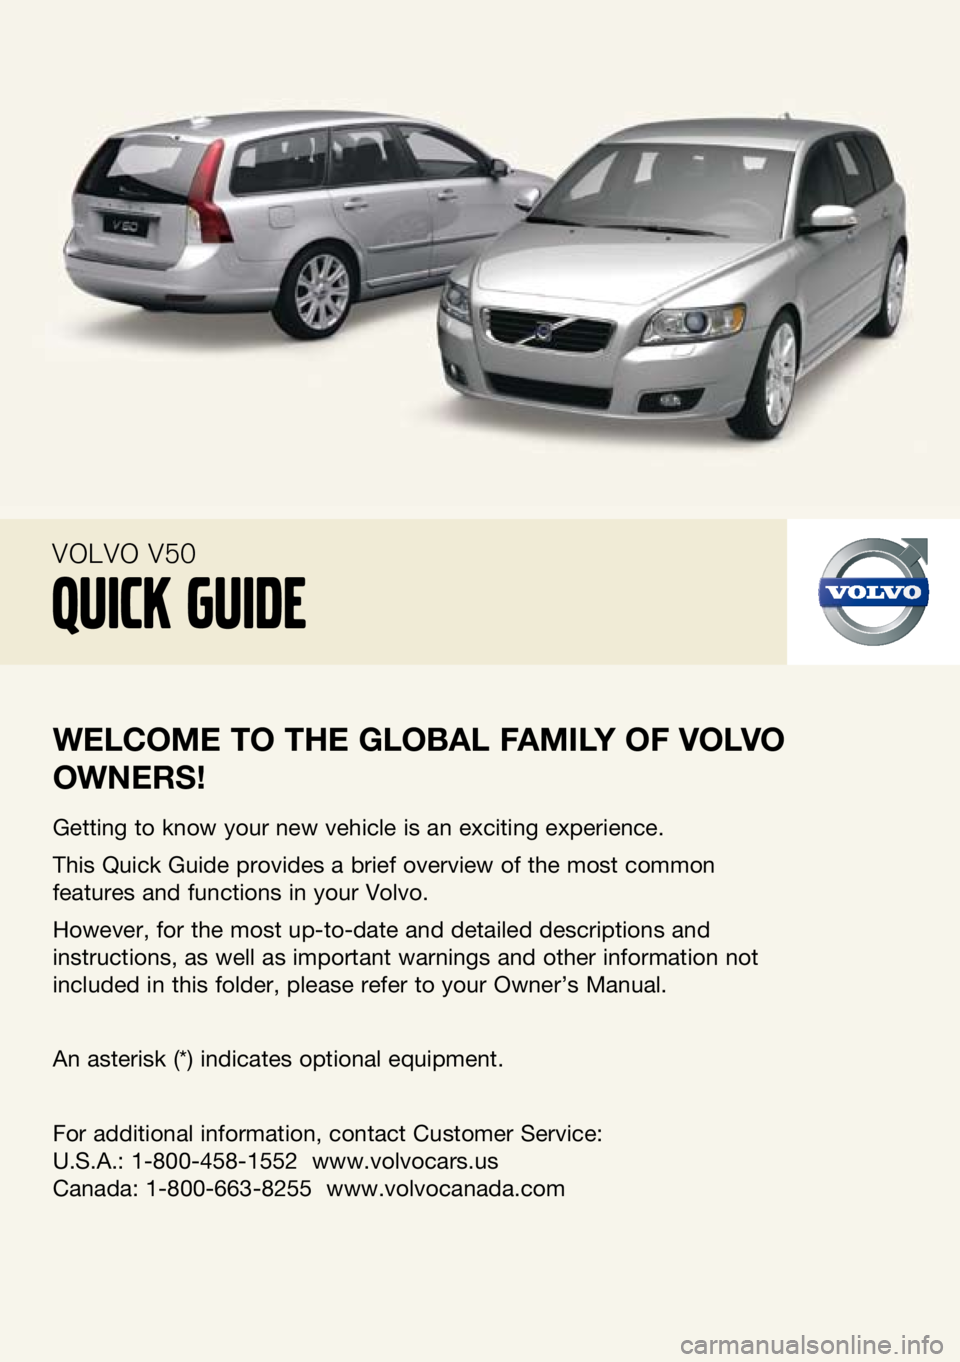 VOLVO V50 2010  Quick Guide 
    --
welcome to the  global F amIly  oF  volvo 
owner S!
Getting to know your new vehicle is an exciting experience.
This Quick Guide provides a brief overview of the most common 
features and func